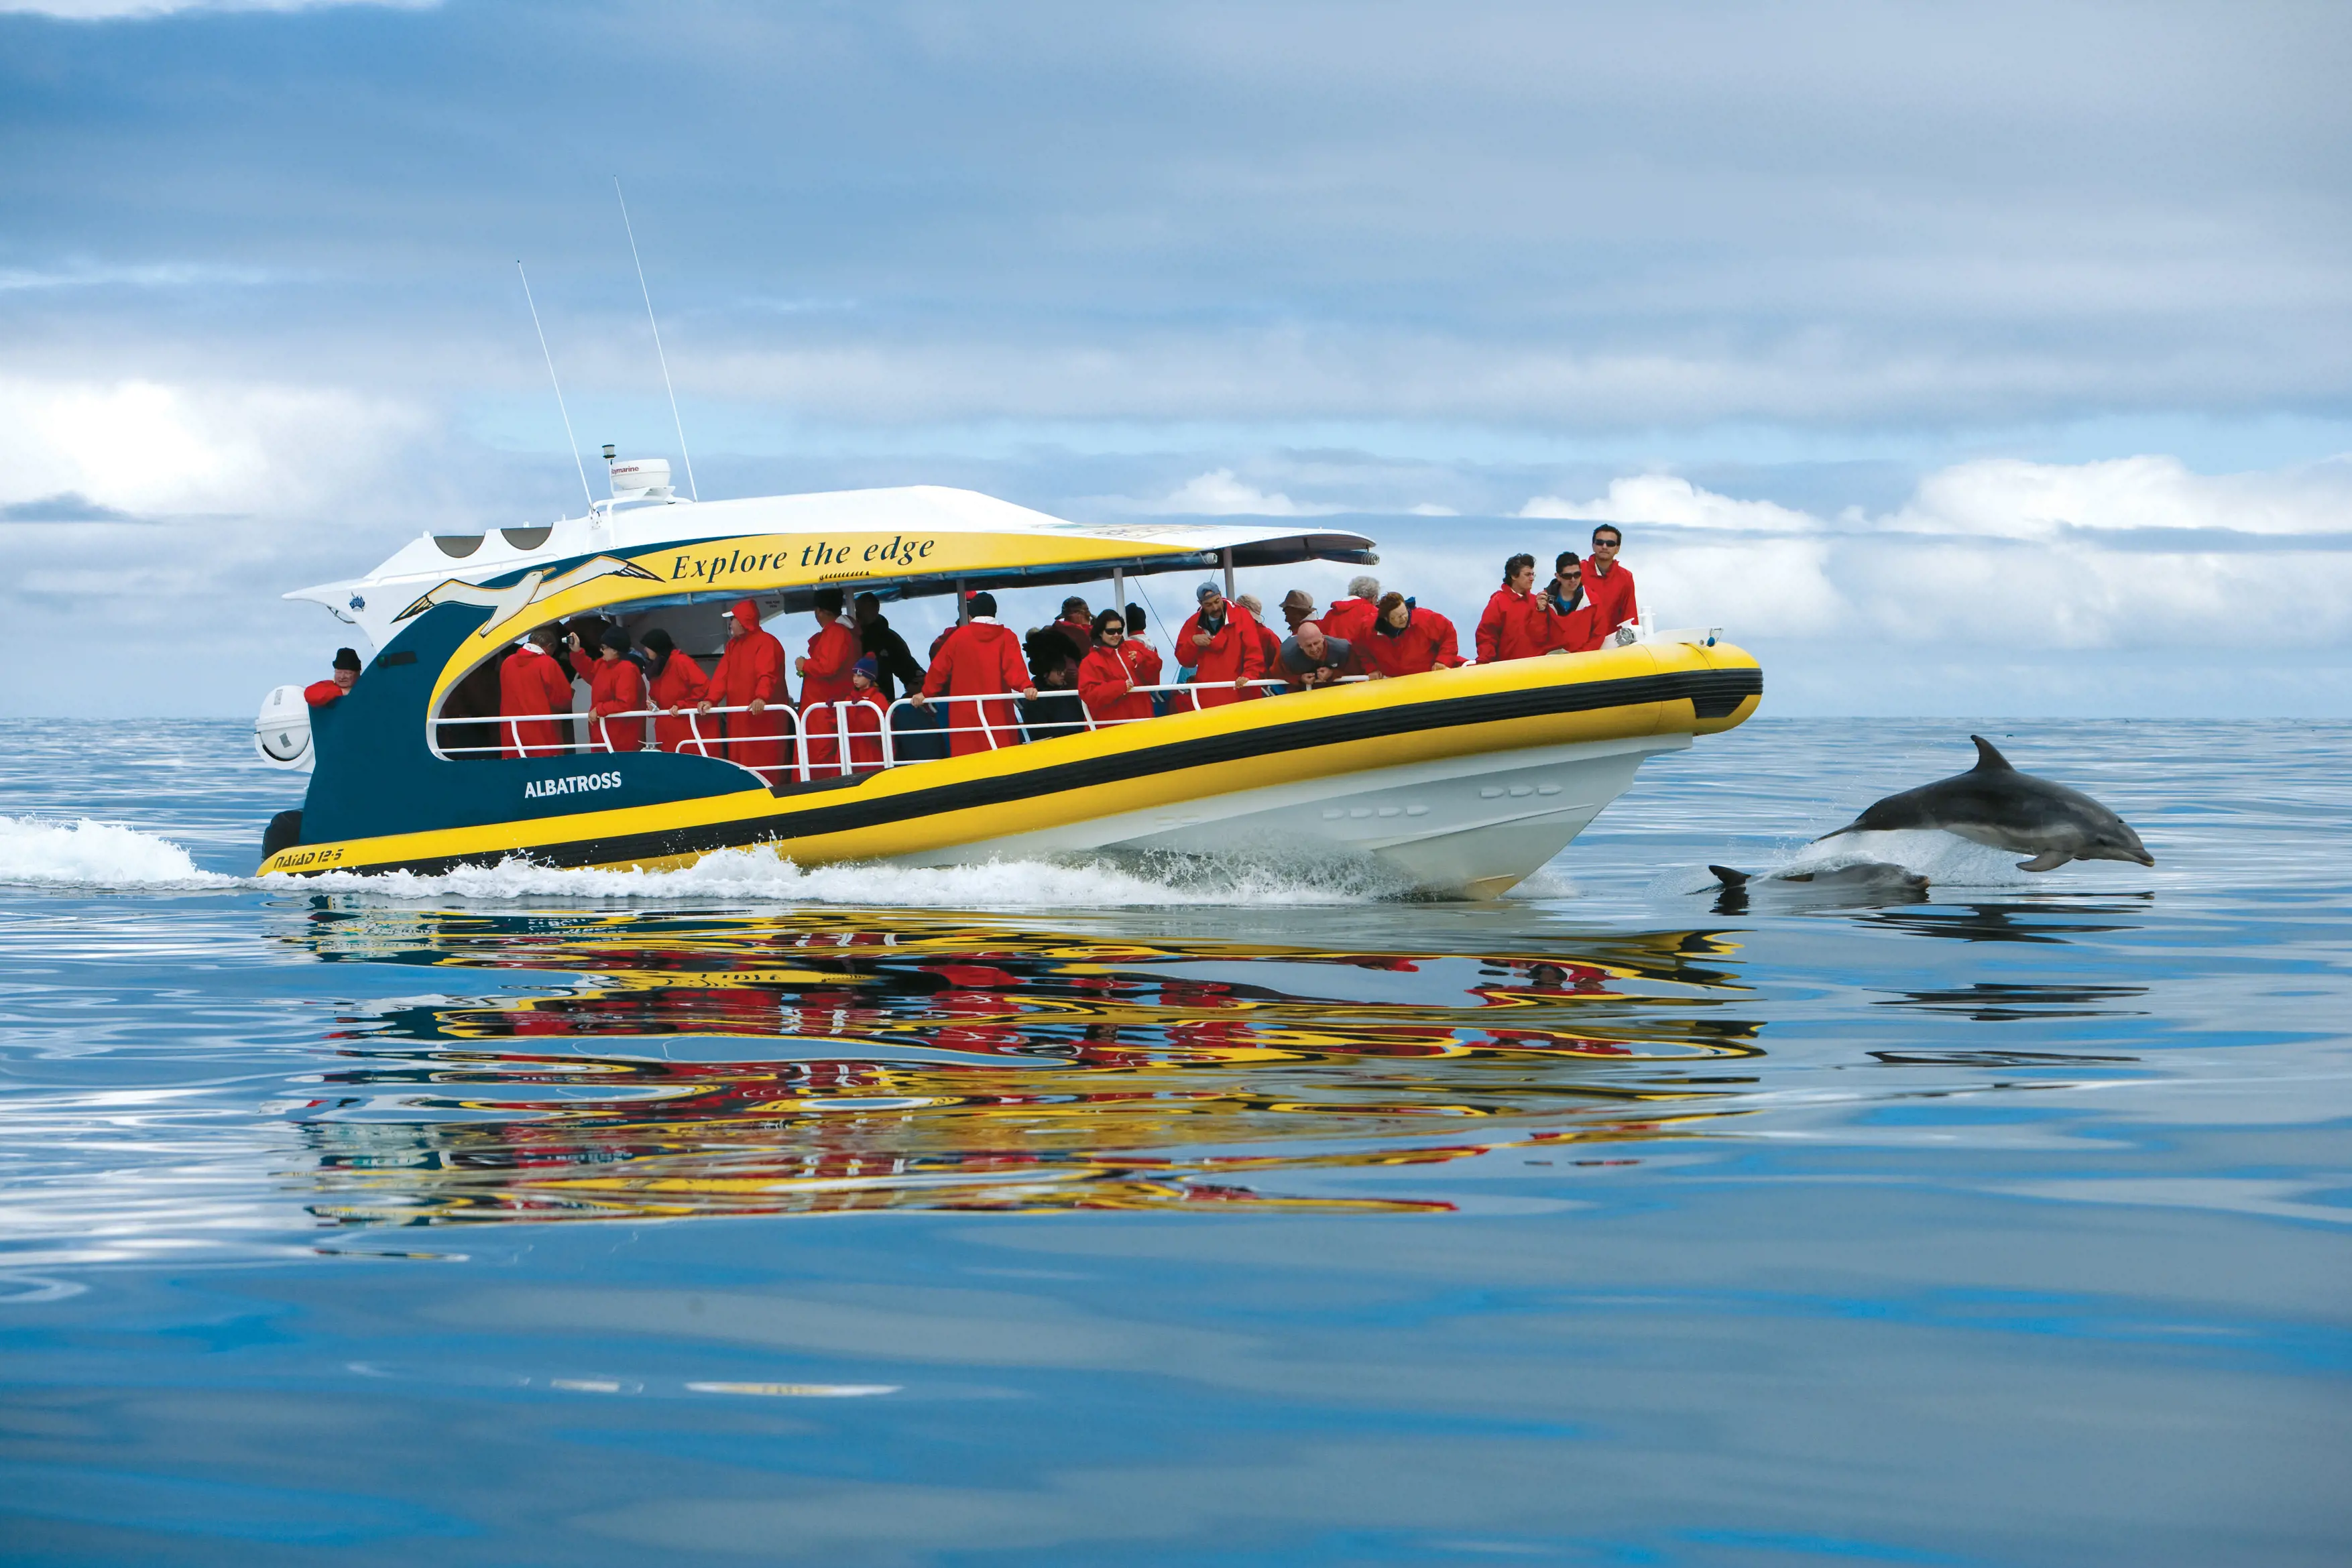 People on the Bruny Island Cruise boat looking at a dolphin in the water.